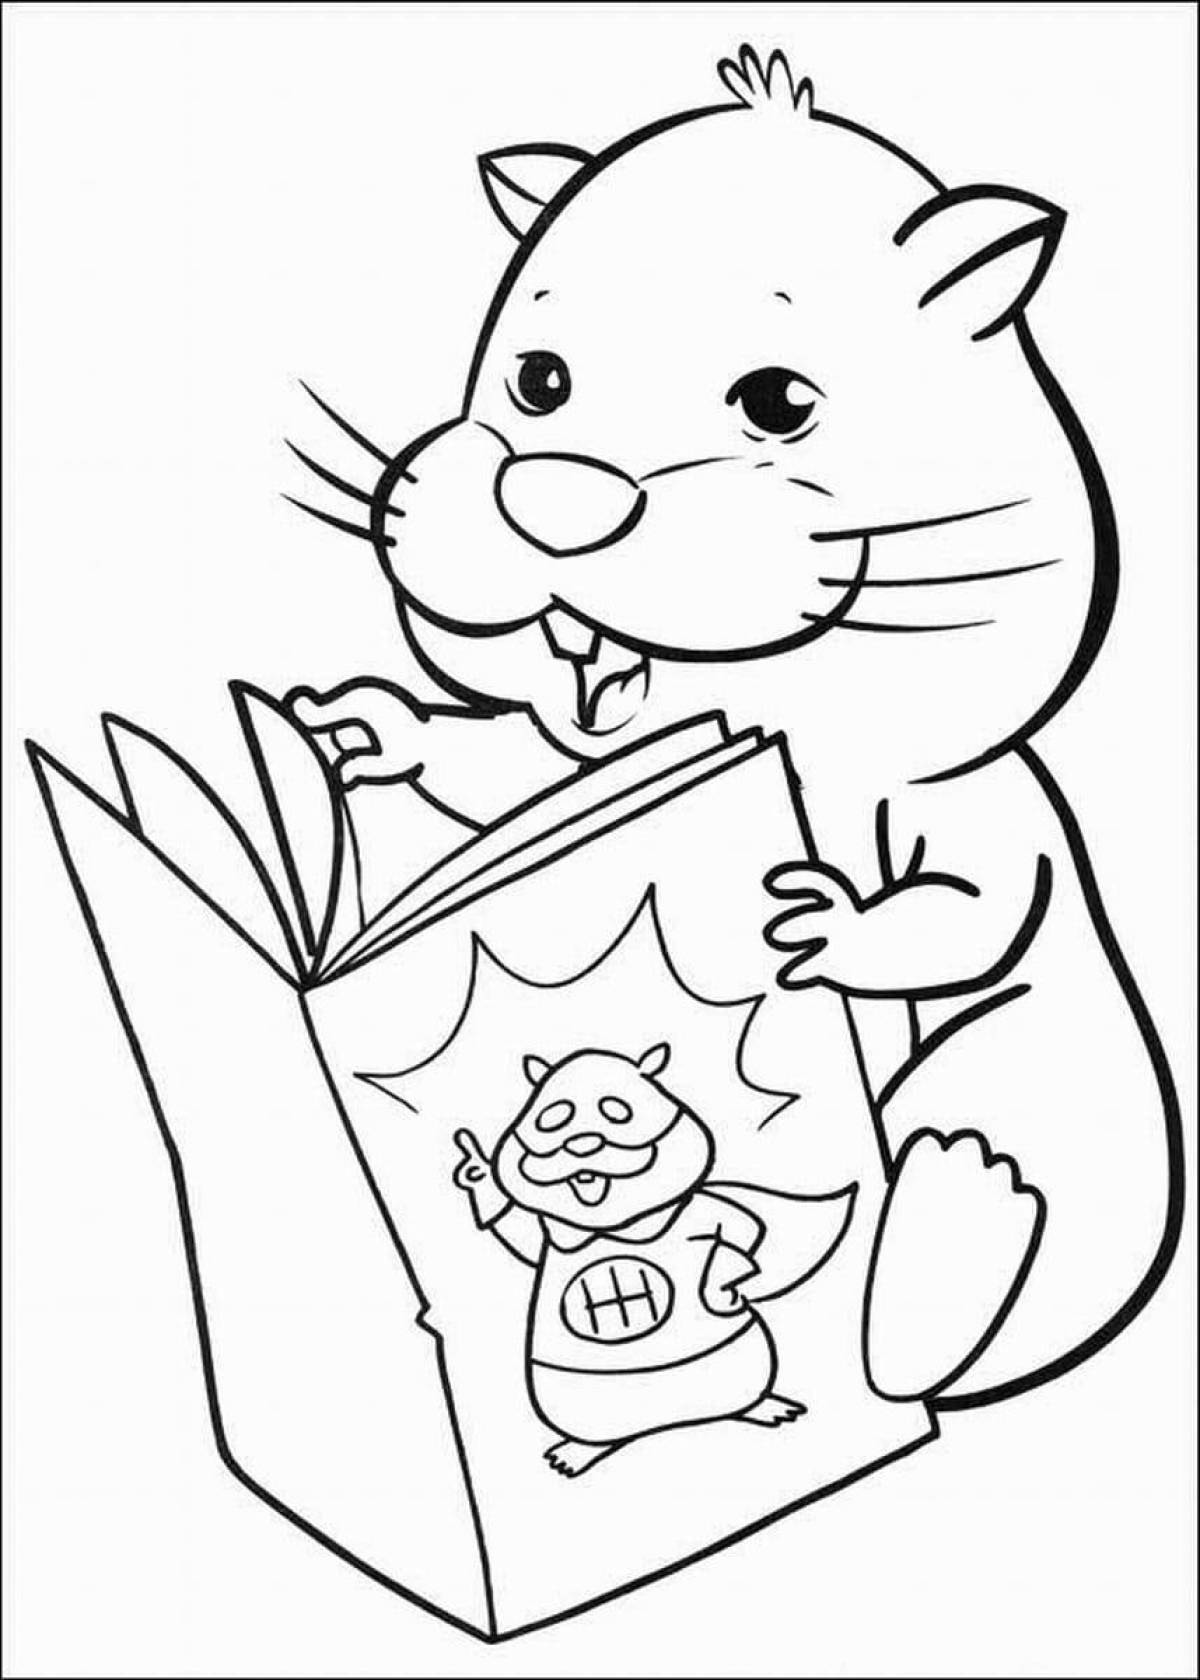 Adorable hamster coloring page for kids